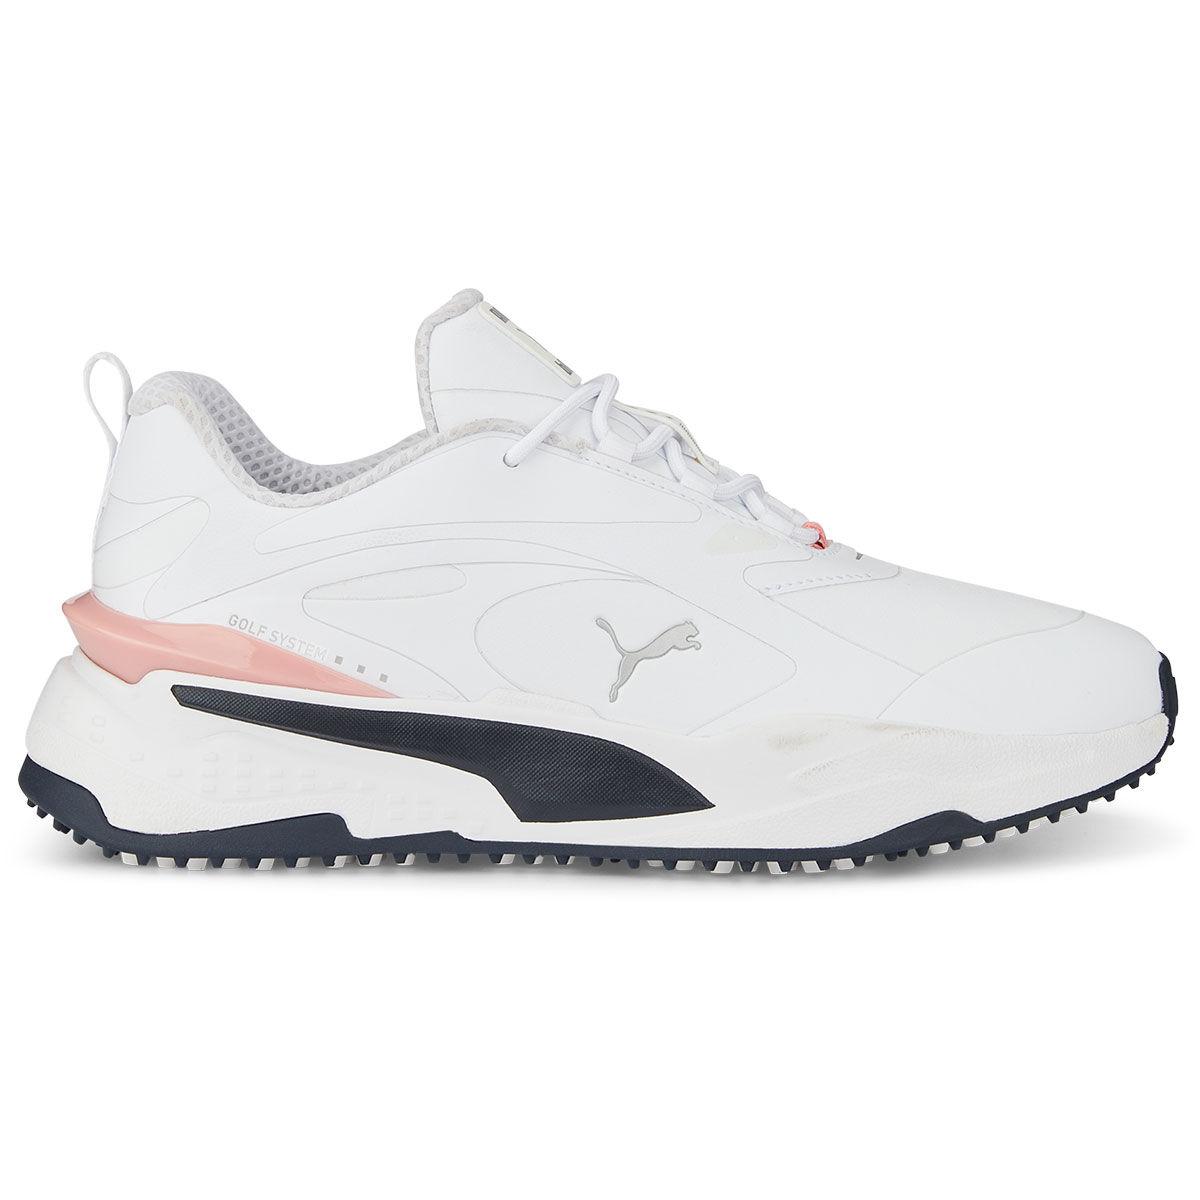 PUMA Golf Women’s White, Black and Pink Waterproof PUMA GS-Fast Spikeless Golf Shoes, Size: 4 | American Golf